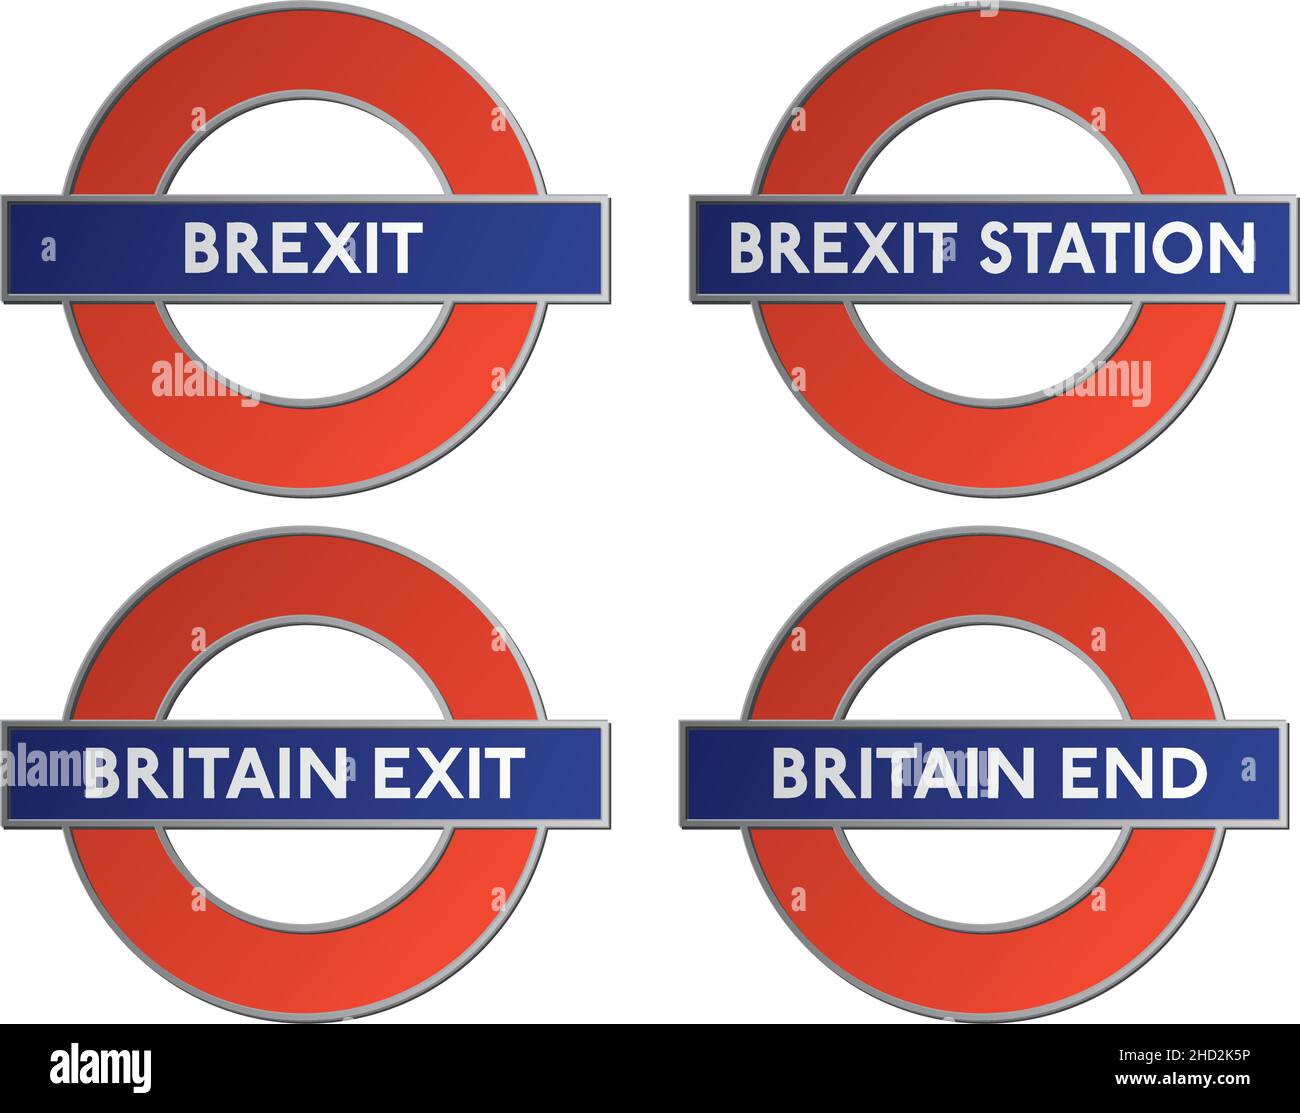 brexit as london underground sign Stock Vector